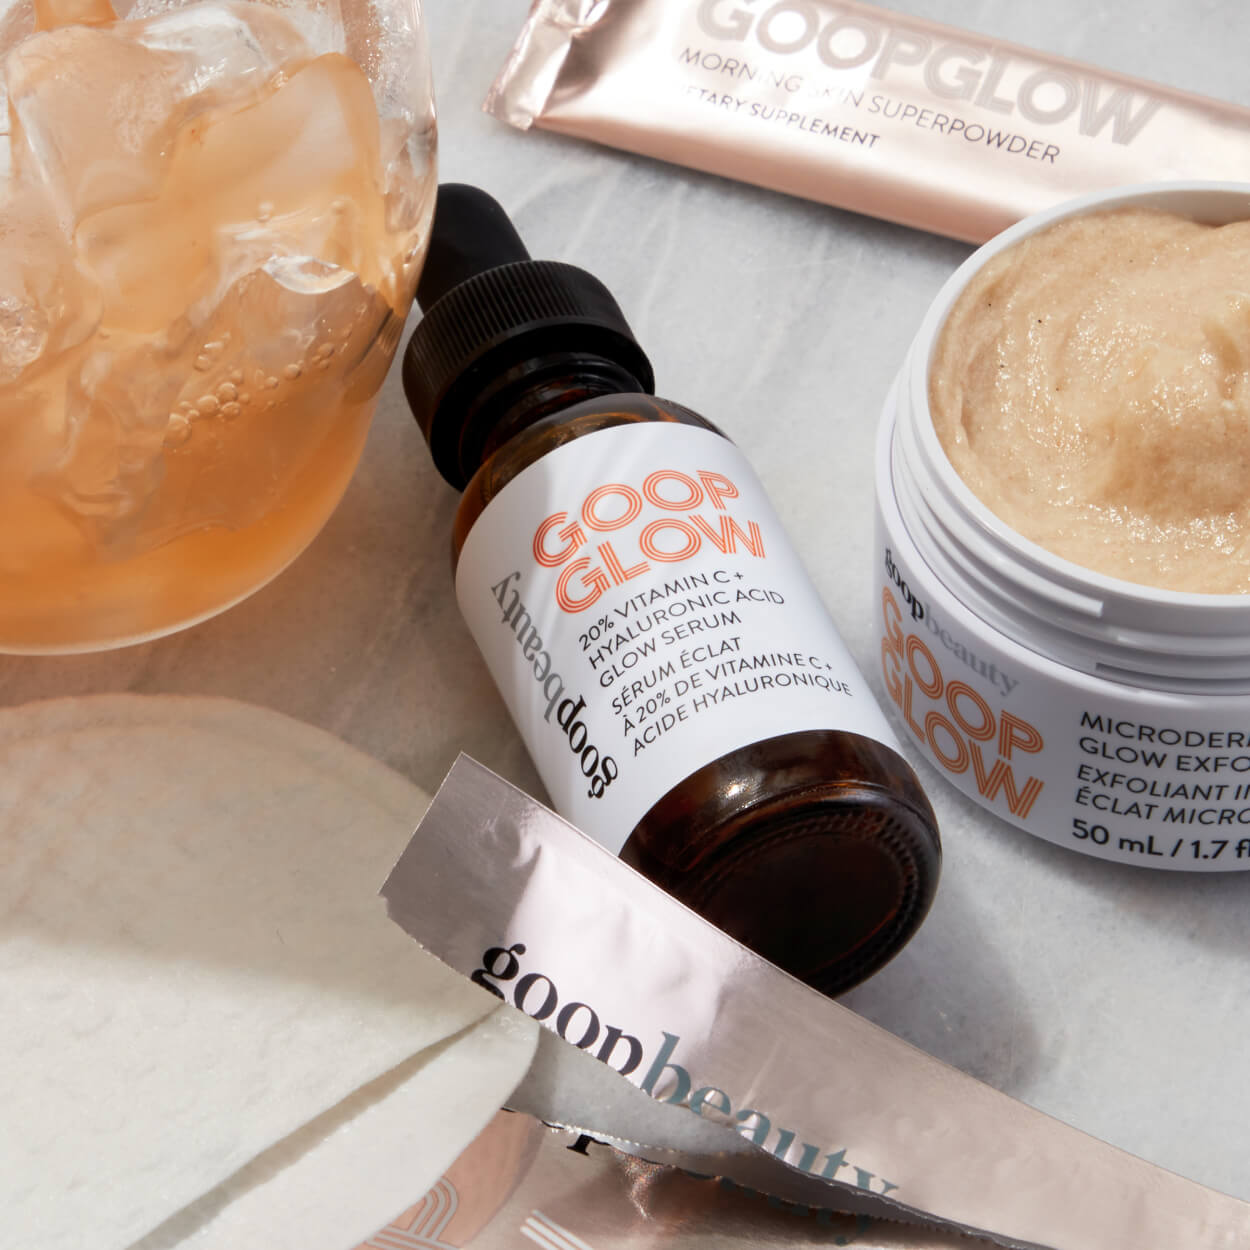 goop beauty products on a marble counter